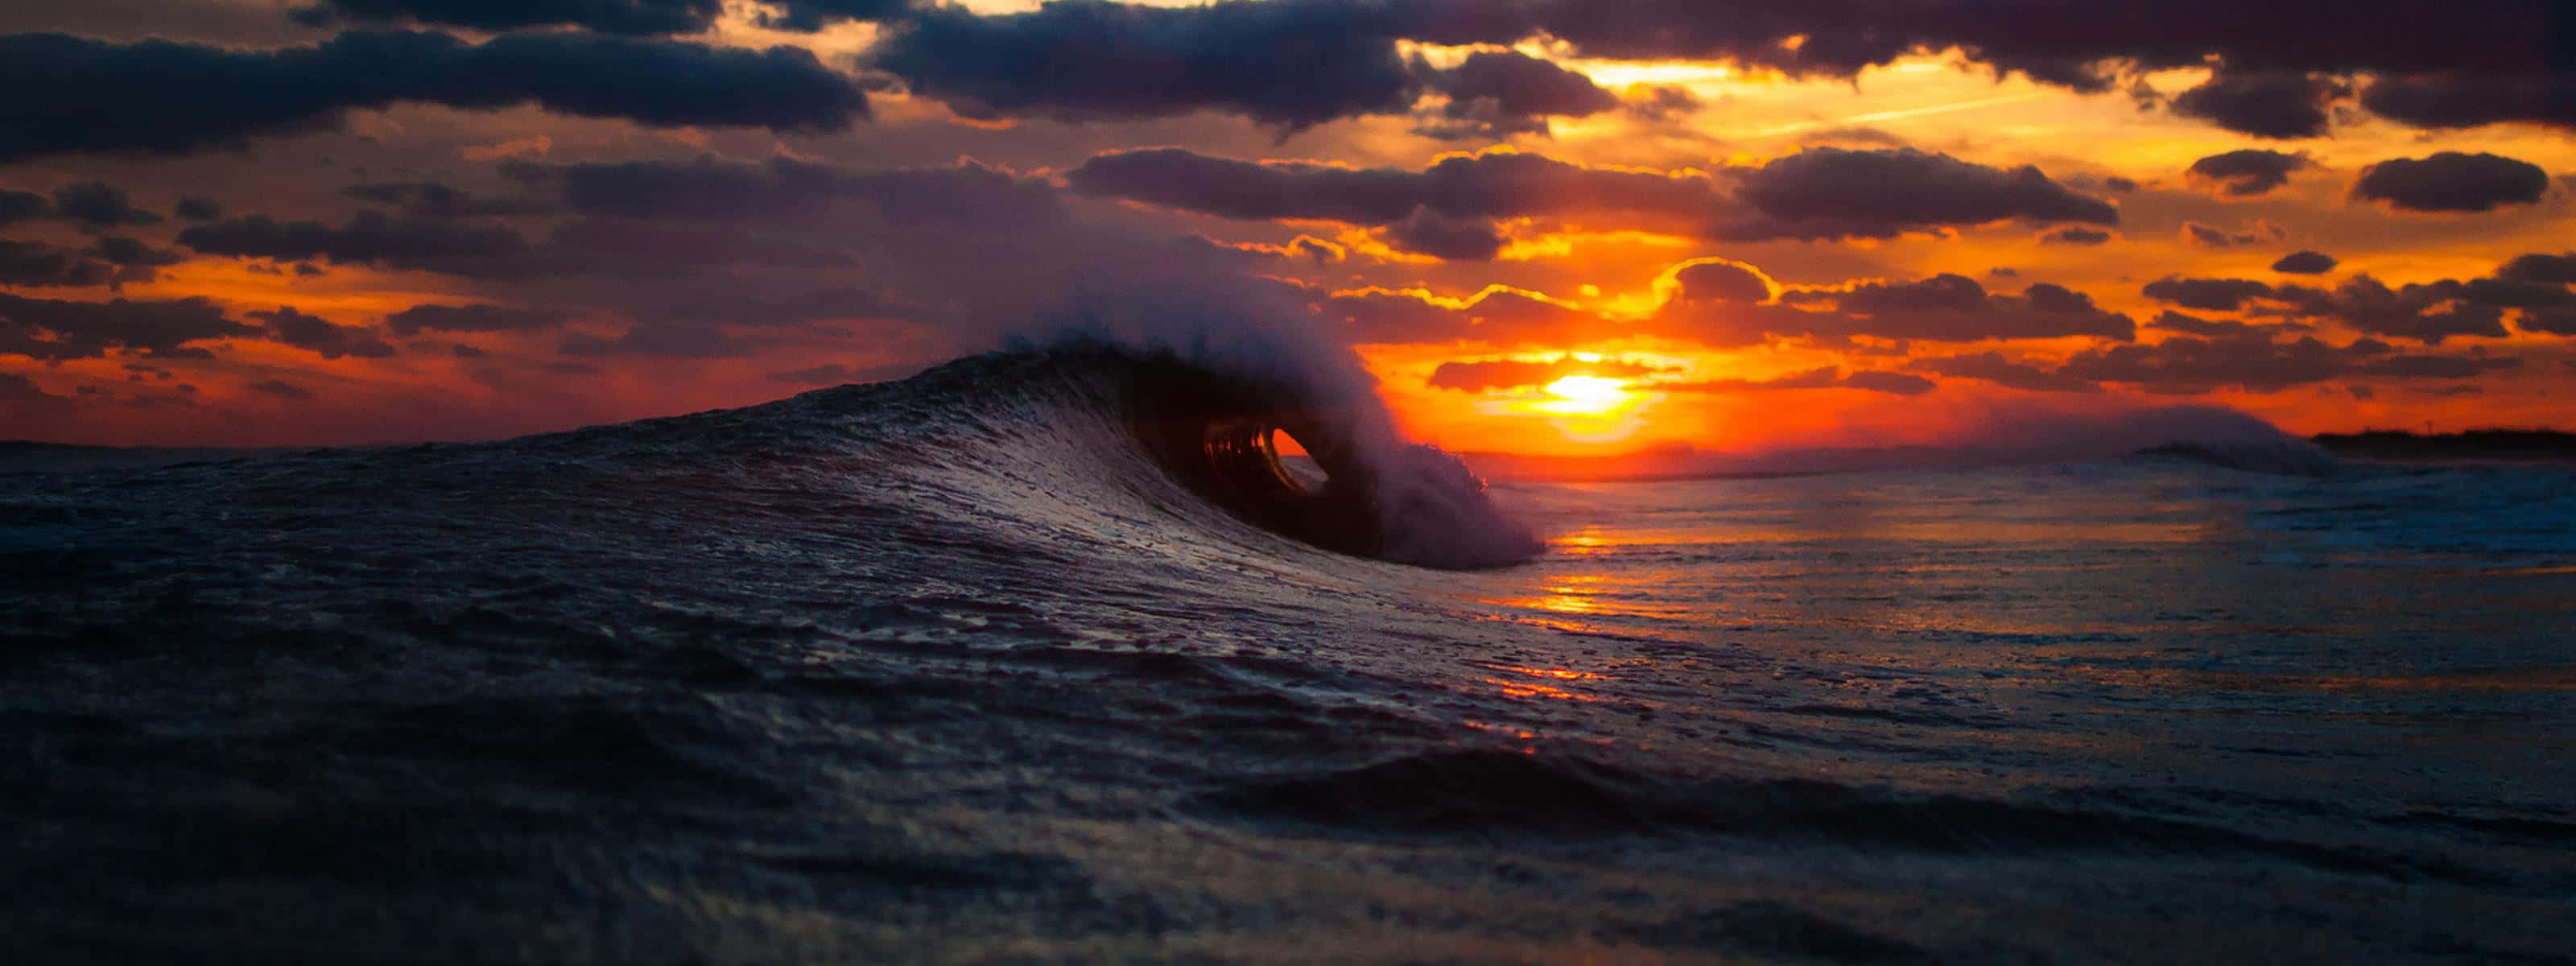 The beauty of a unique sunset reflected in the waves Wallpaper